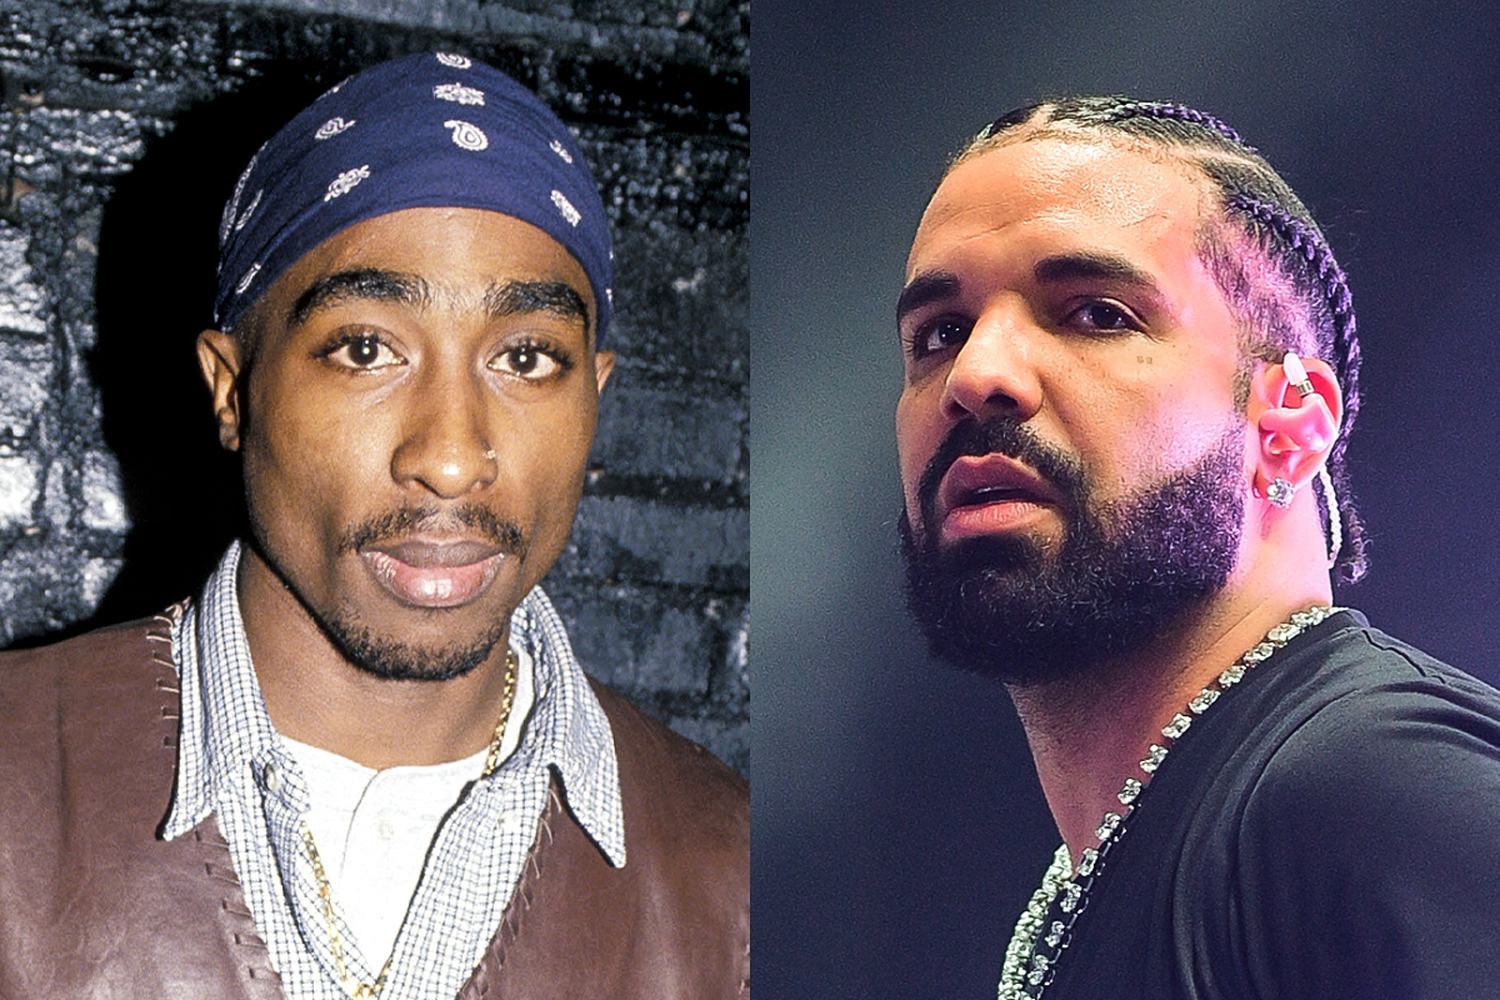 Tupac’s estate threatens to sue Drake over dis track using what appears to be late rapper’s AI-generated voice